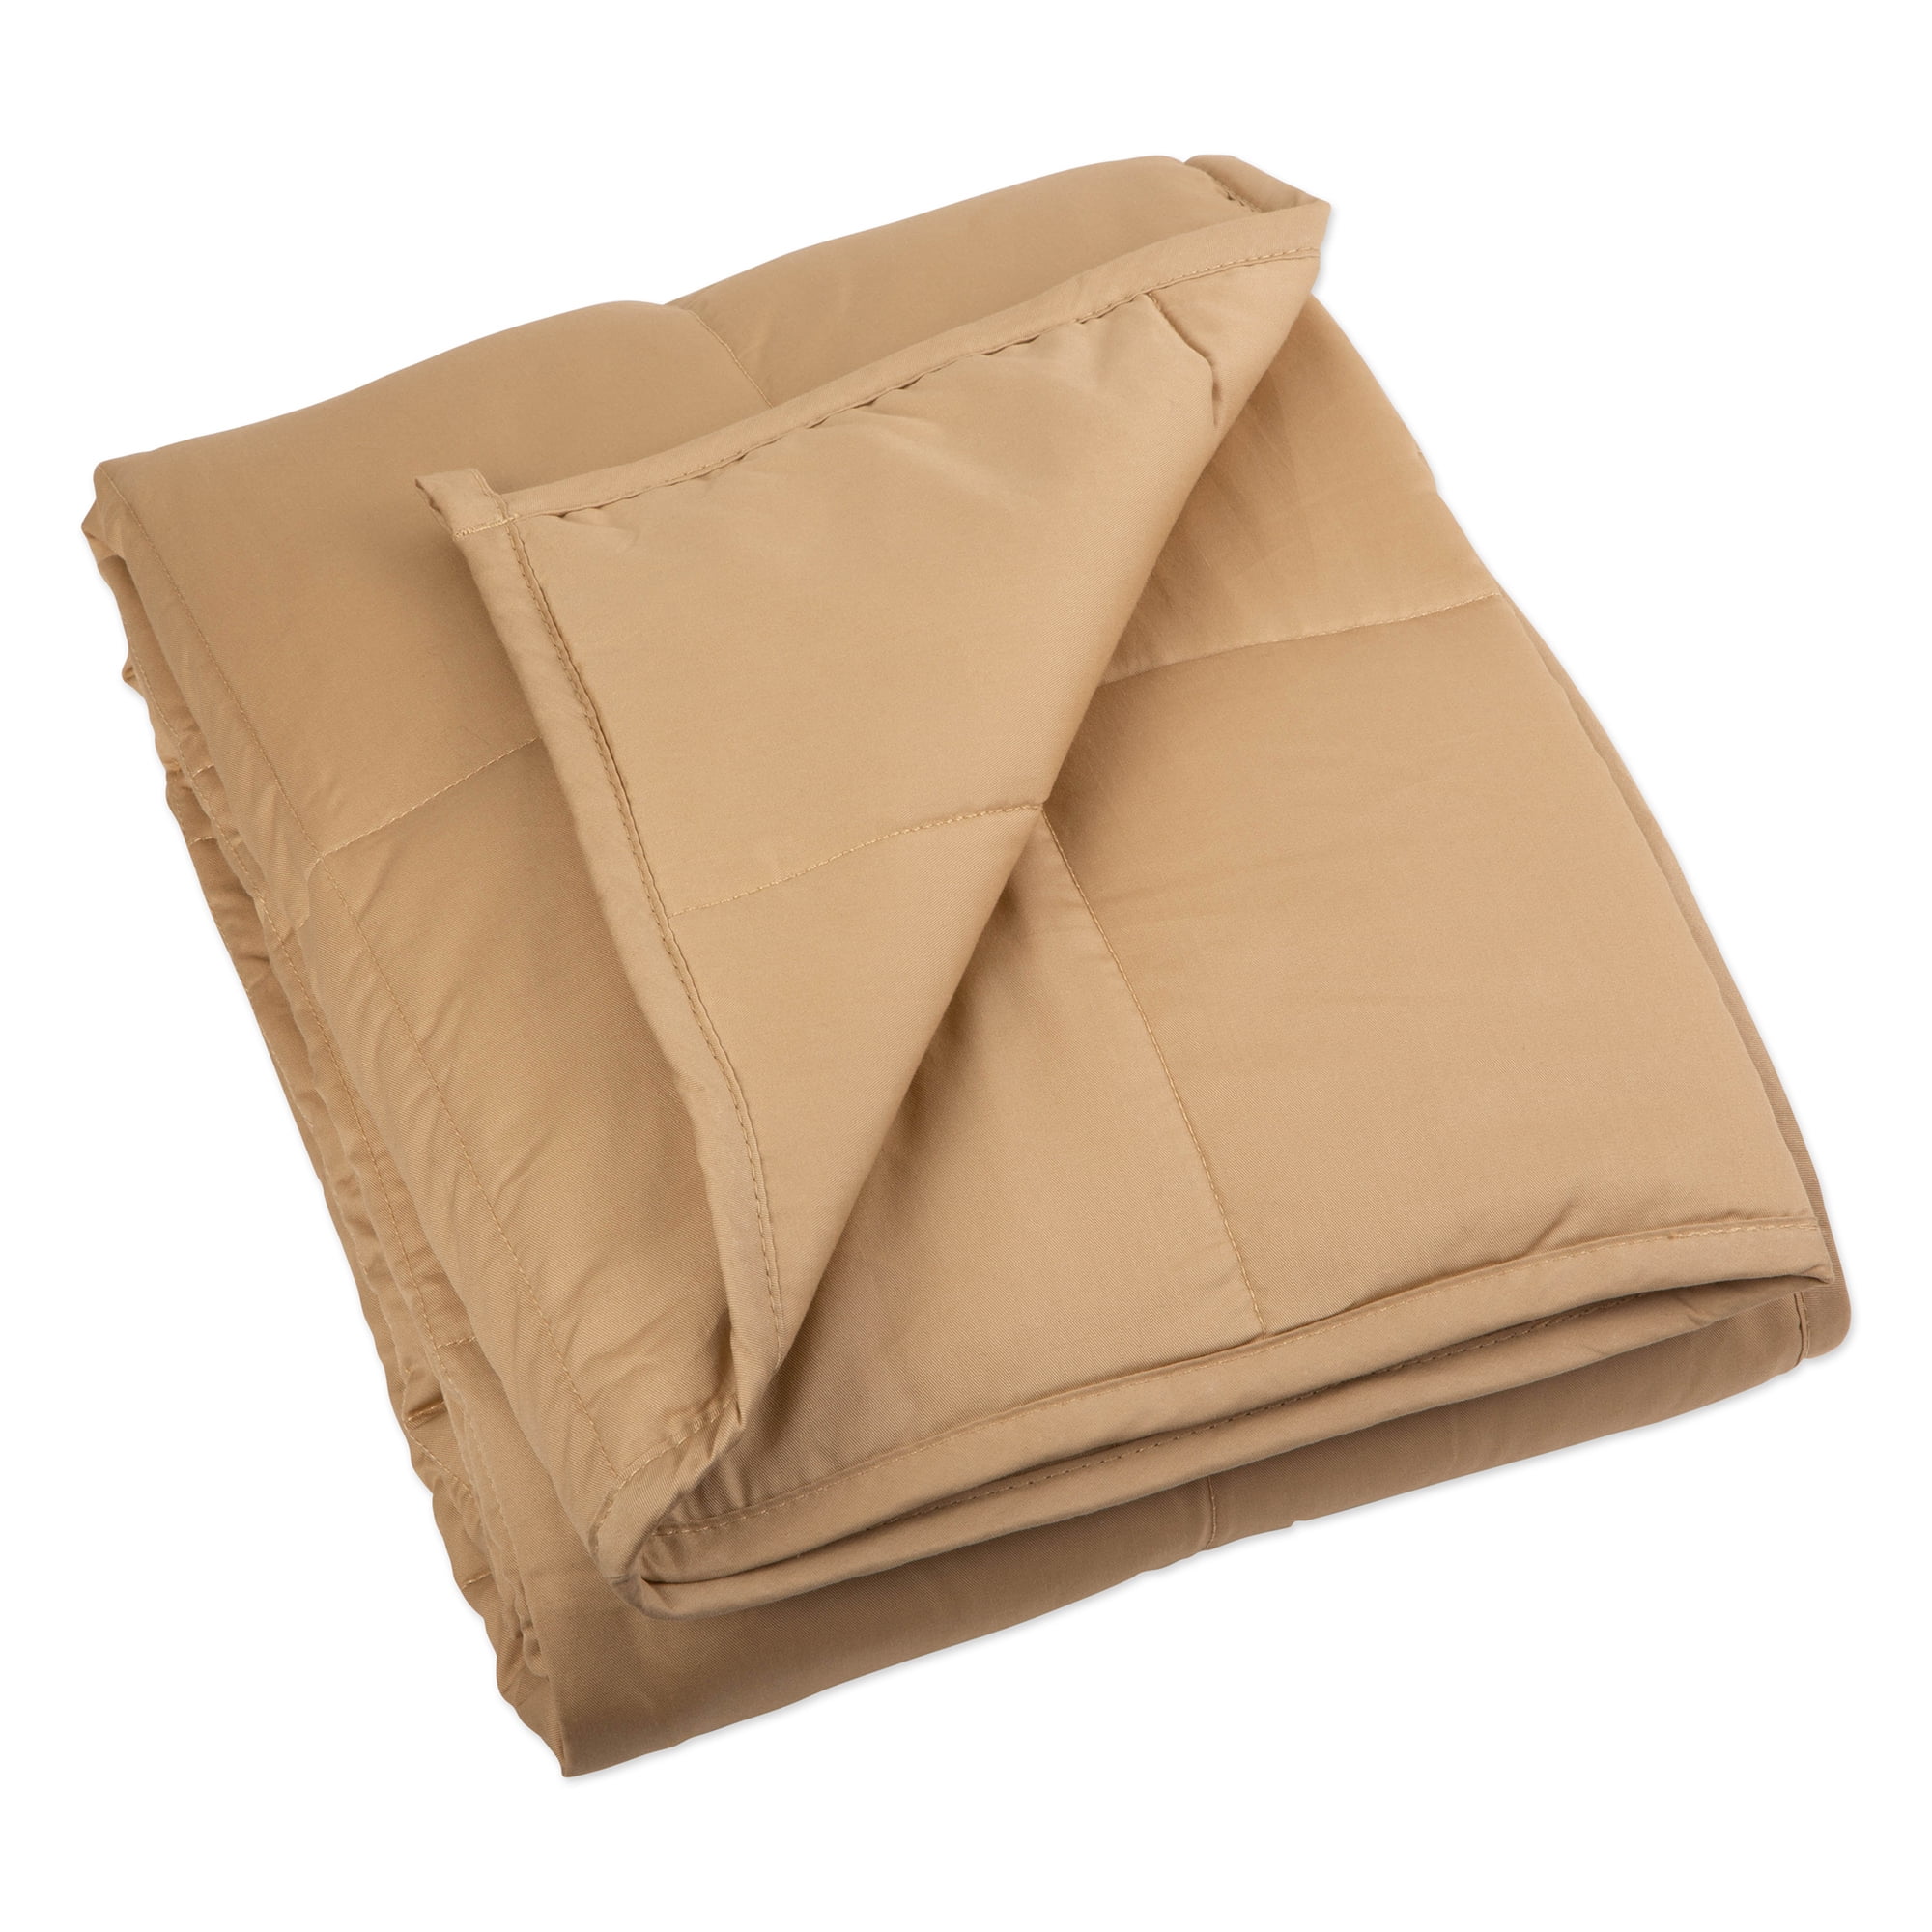 Z02286 15 Lbs Weighted Blanket , Taupe - 48 X 72 In.